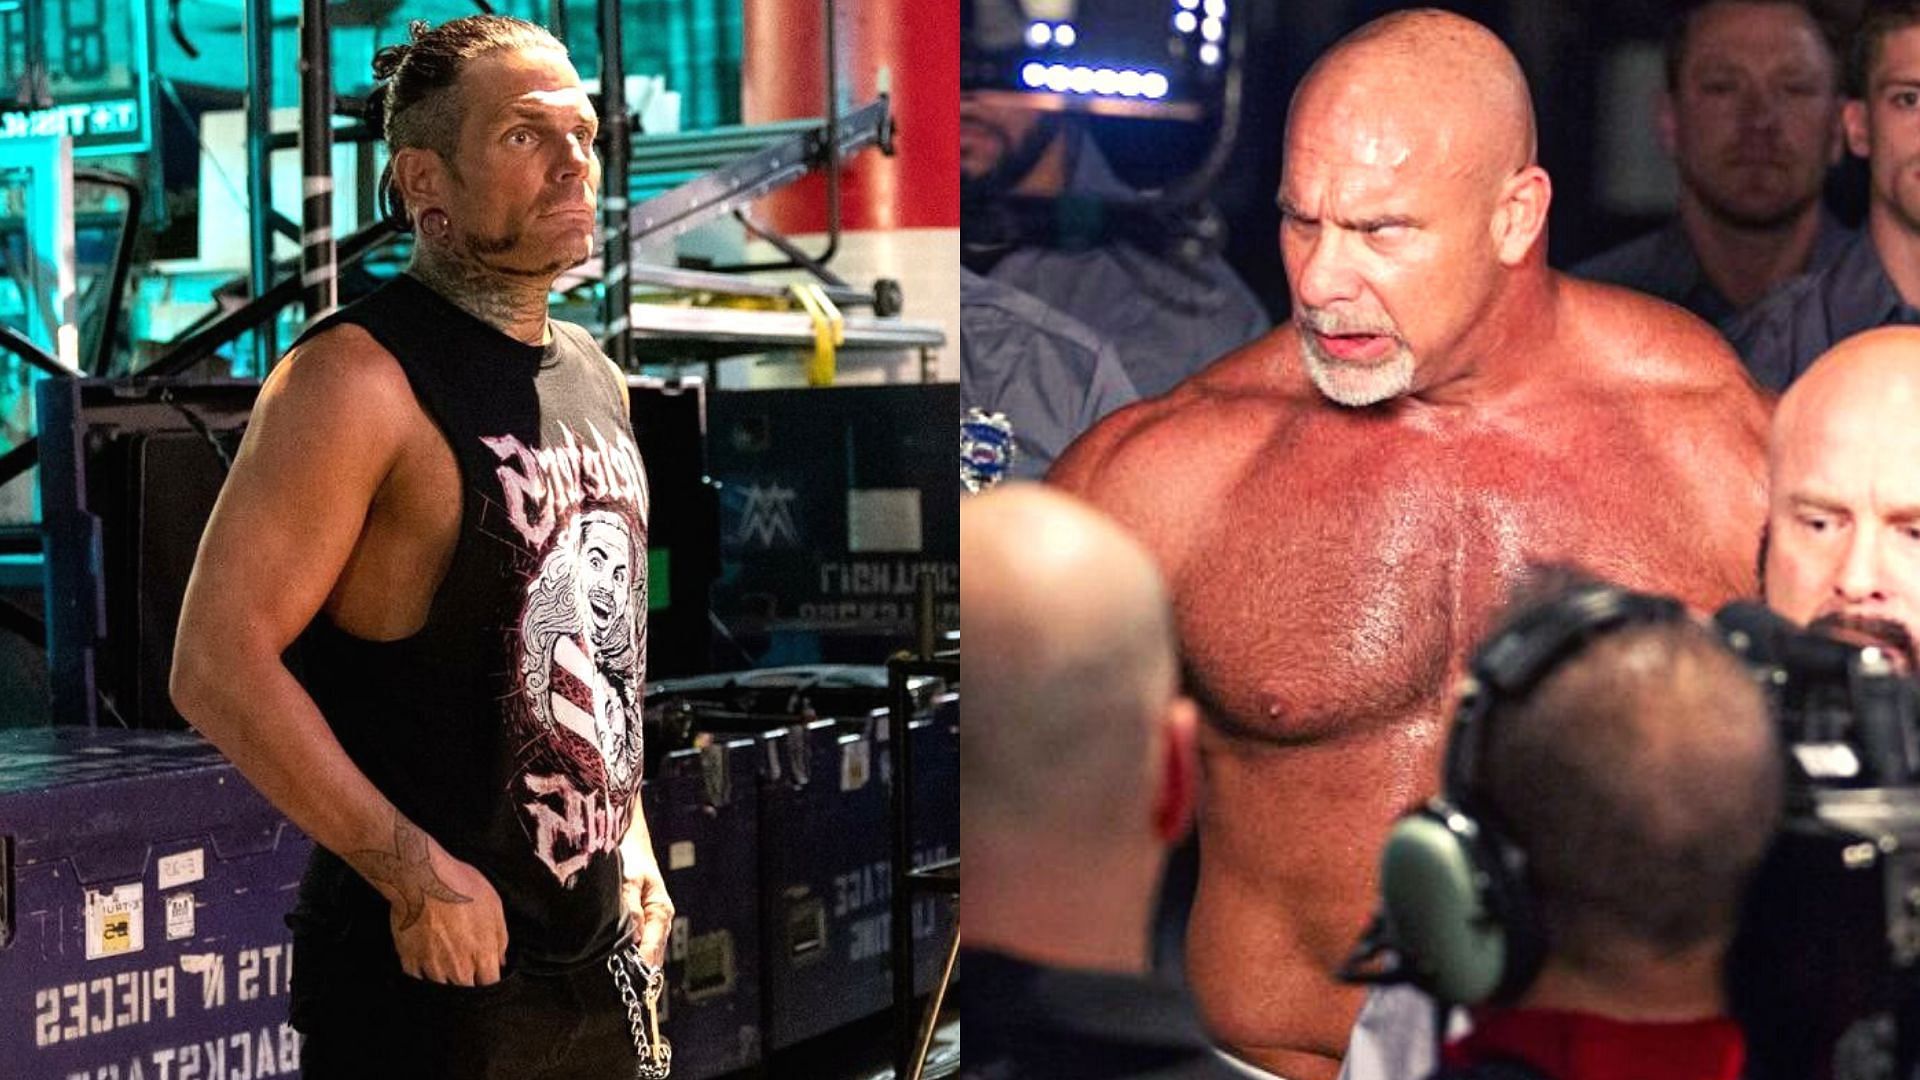 The WWE News &amp; Rumor Roundup features big stories about Jeff Hardy and Goldberg.